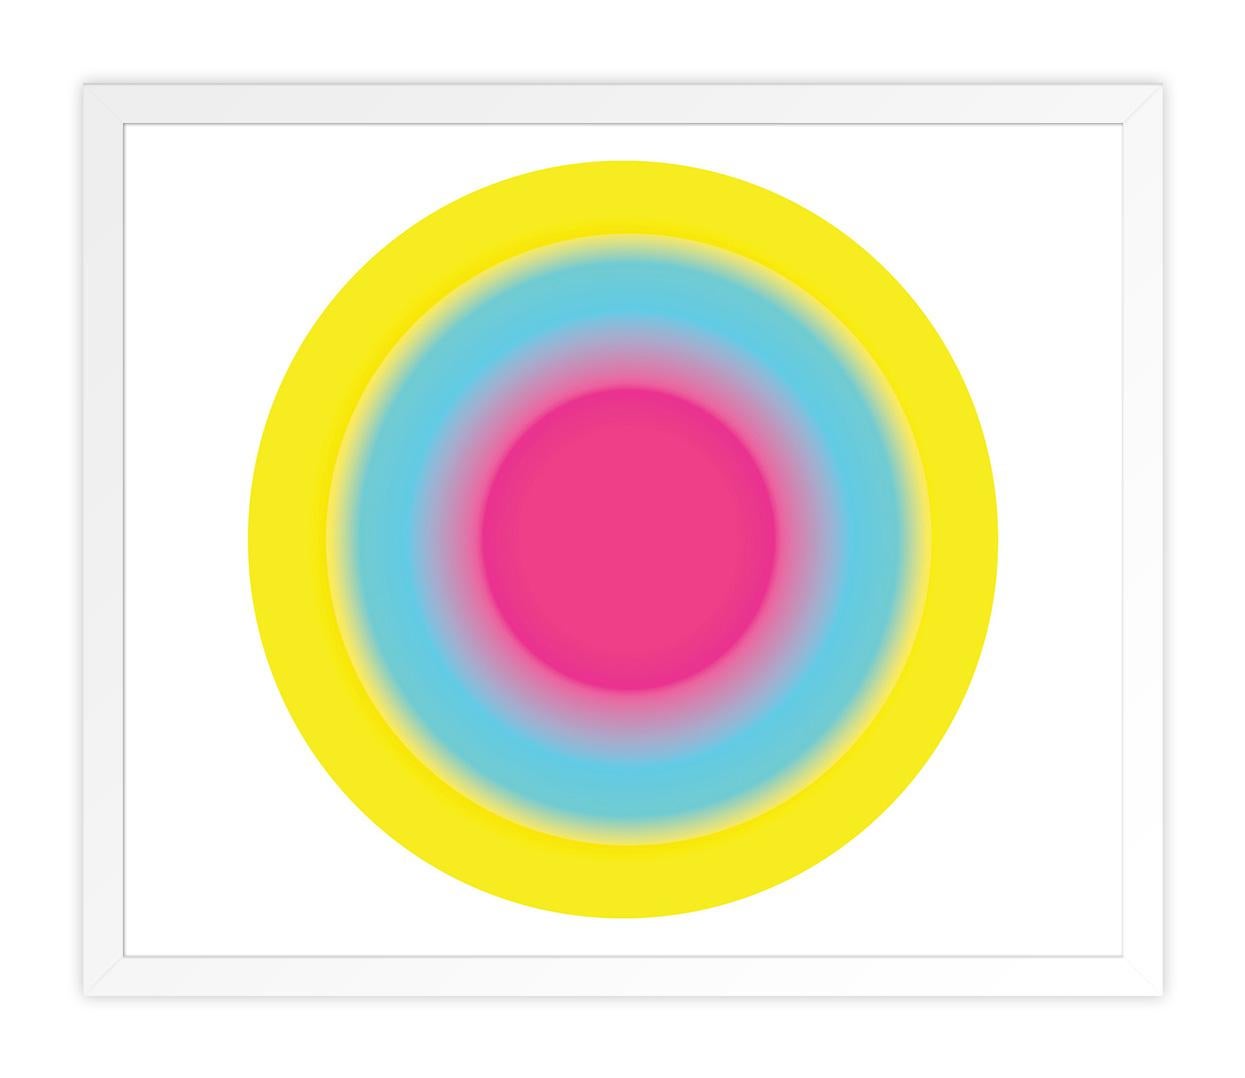 ABOUT THIS PIECE: Color is the foundation of my work. My circles start as a mood or idea that eventually evolves into a colored circle. I am curious how different colours interact when they're placed next to each other. I experiment with intensity